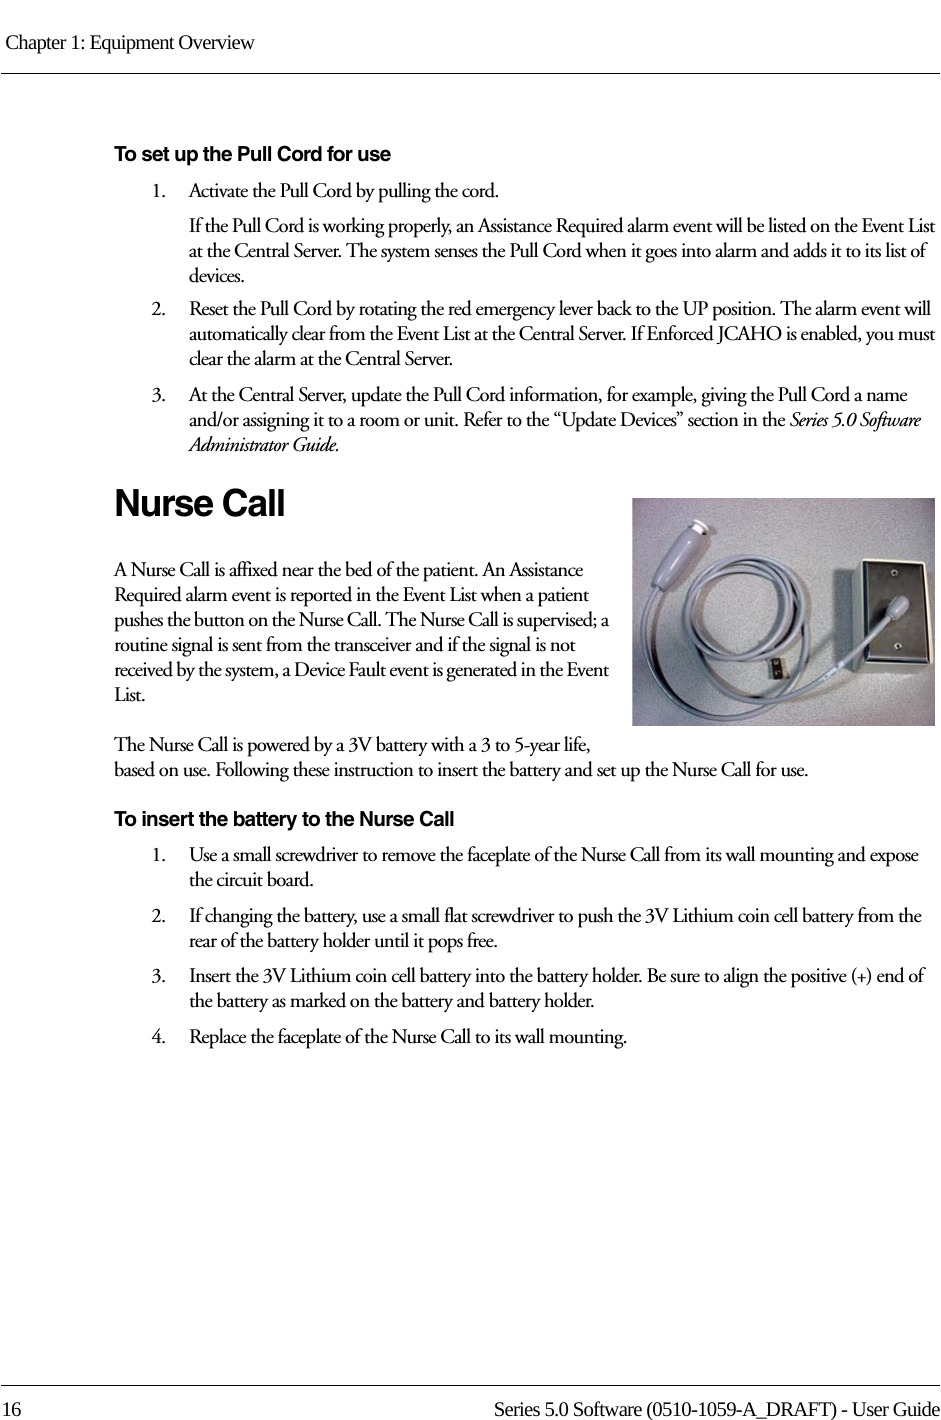 Chapter 1: Equipment Overview 16 Series 5.0 Software (0510-1059-A_DRAFT) - User GuideTo set up the Pull Cord for use1.    Activate the Pull Cord by pulling the cord.If the Pull Cord is working properly, an Assistance Required alarm event will be listed on the Event List at the Central Server. The system senses the Pull Cord when it goes into alarm and adds it to its list of devices.2.    Reset the Pull Cord by rotating the red emergency lever back to the UP position. The alarm event will automatically clear from the Event List at the Central Server. If Enforced JCAHO is enabled, you must clear the alarm at the Central Server.3.    At the Central Server, update the Pull Cord information, for example, giving the Pull Cord a name and/or assigning it to a room or unit. Refer to the “Update Devices” section in the Series 5.0 Software Administrator Guide.Nurse CallA Nurse Call is affixed near the bed of the patient. An Assistance Required alarm event is reported in the Event List when a patient pushes the button on the Nurse Call. The Nurse Call is supervised; a routine signal is sent from the transceiver and if the signal is not received by the system, a Device Fault event is generated in the Event List.The Nurse Call is powered by a 3V battery with a 3 to 5-year life, based on use. Following these instruction to insert the battery and set up the Nurse Call for use.To insert the battery to the Nurse Call1.    Use a small screwdriver to remove the faceplate of the Nurse Call from its wall mounting and expose the circuit board.2.    If changing the battery, use a small flat screwdriver to push the 3V Lithium coin cell battery from the rear of the battery holder until it pops free.3.    Insert the 3V Lithium coin cell battery into the battery holder. Be sure to align the positive (+) end of the battery as marked on the battery and battery holder.4.    Replace the faceplate of the Nurse Call to its wall mounting.